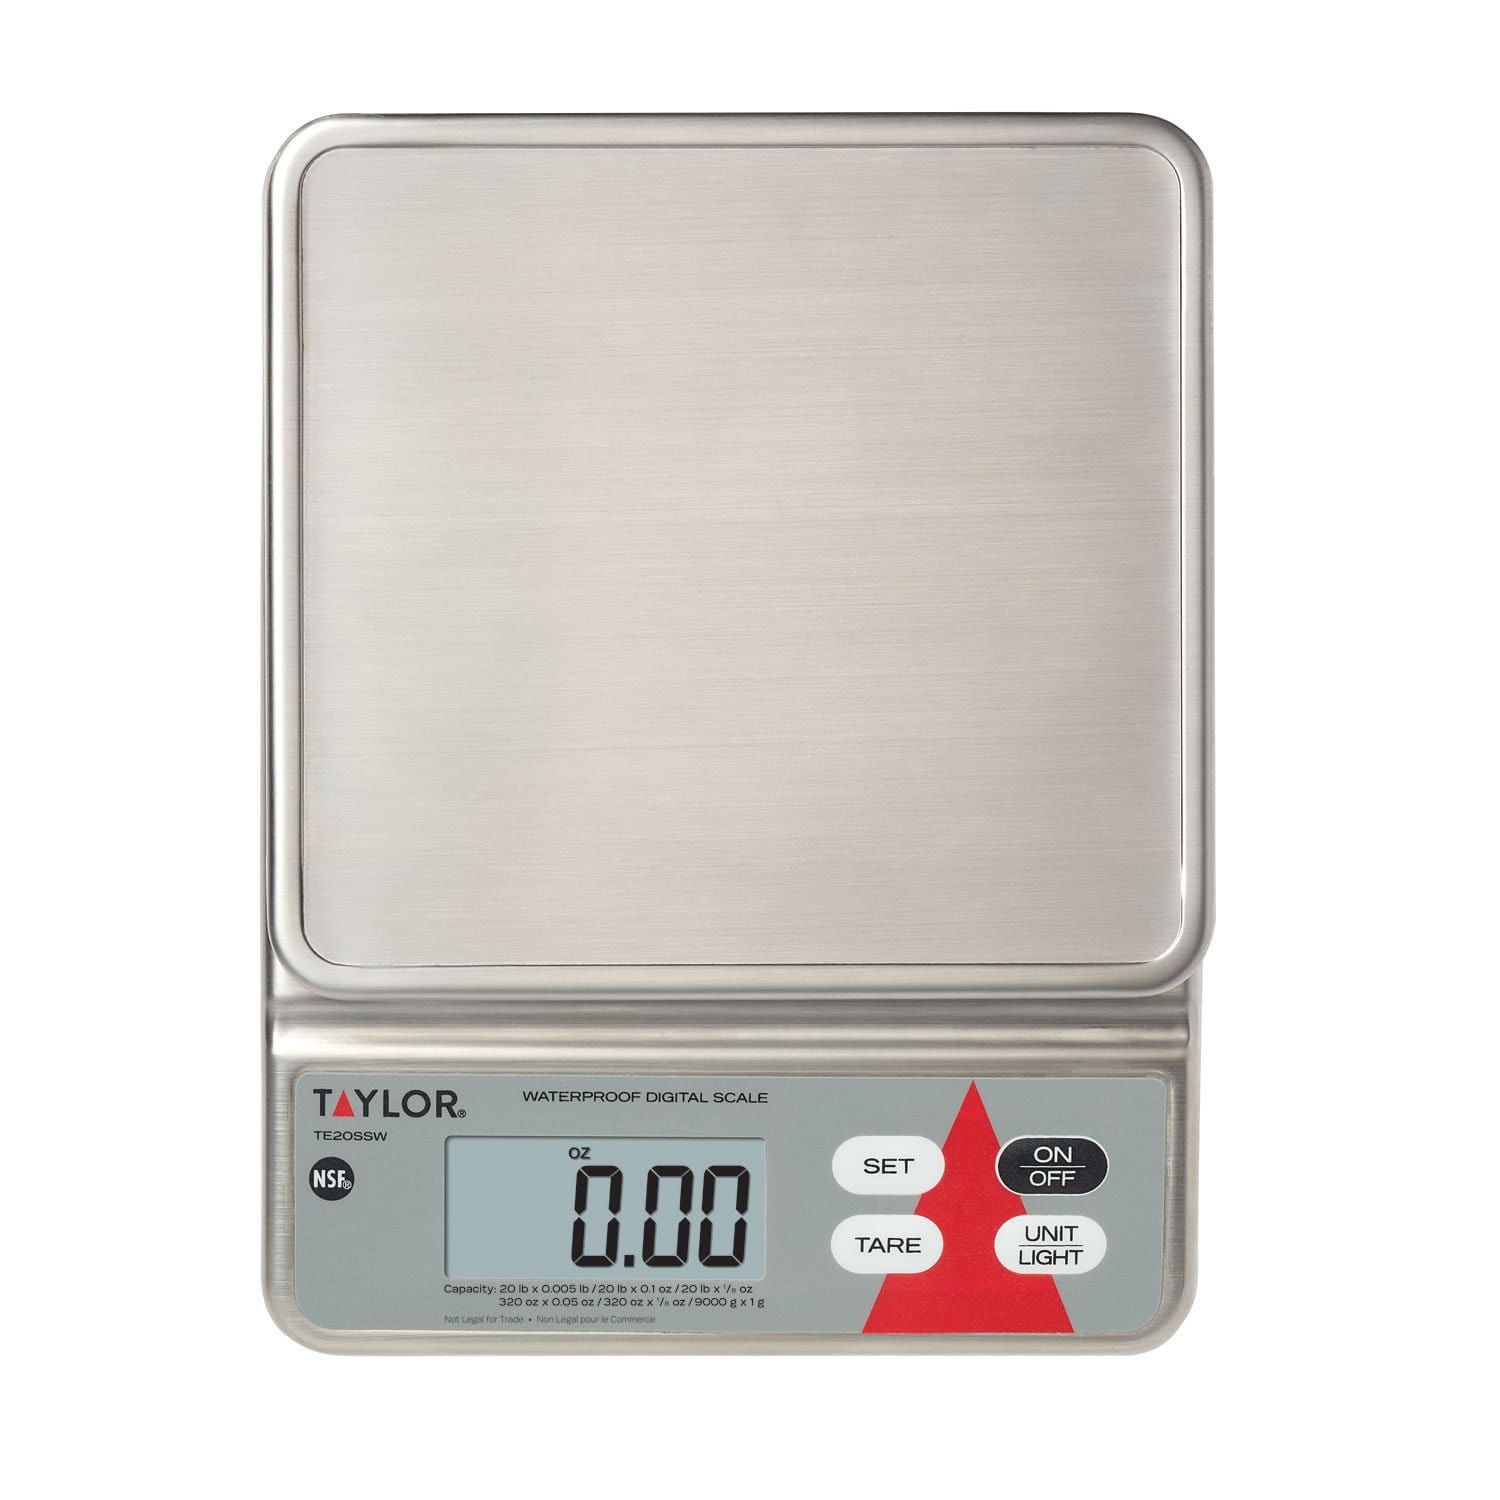 Healthy Portions Food Scale, 37204014T